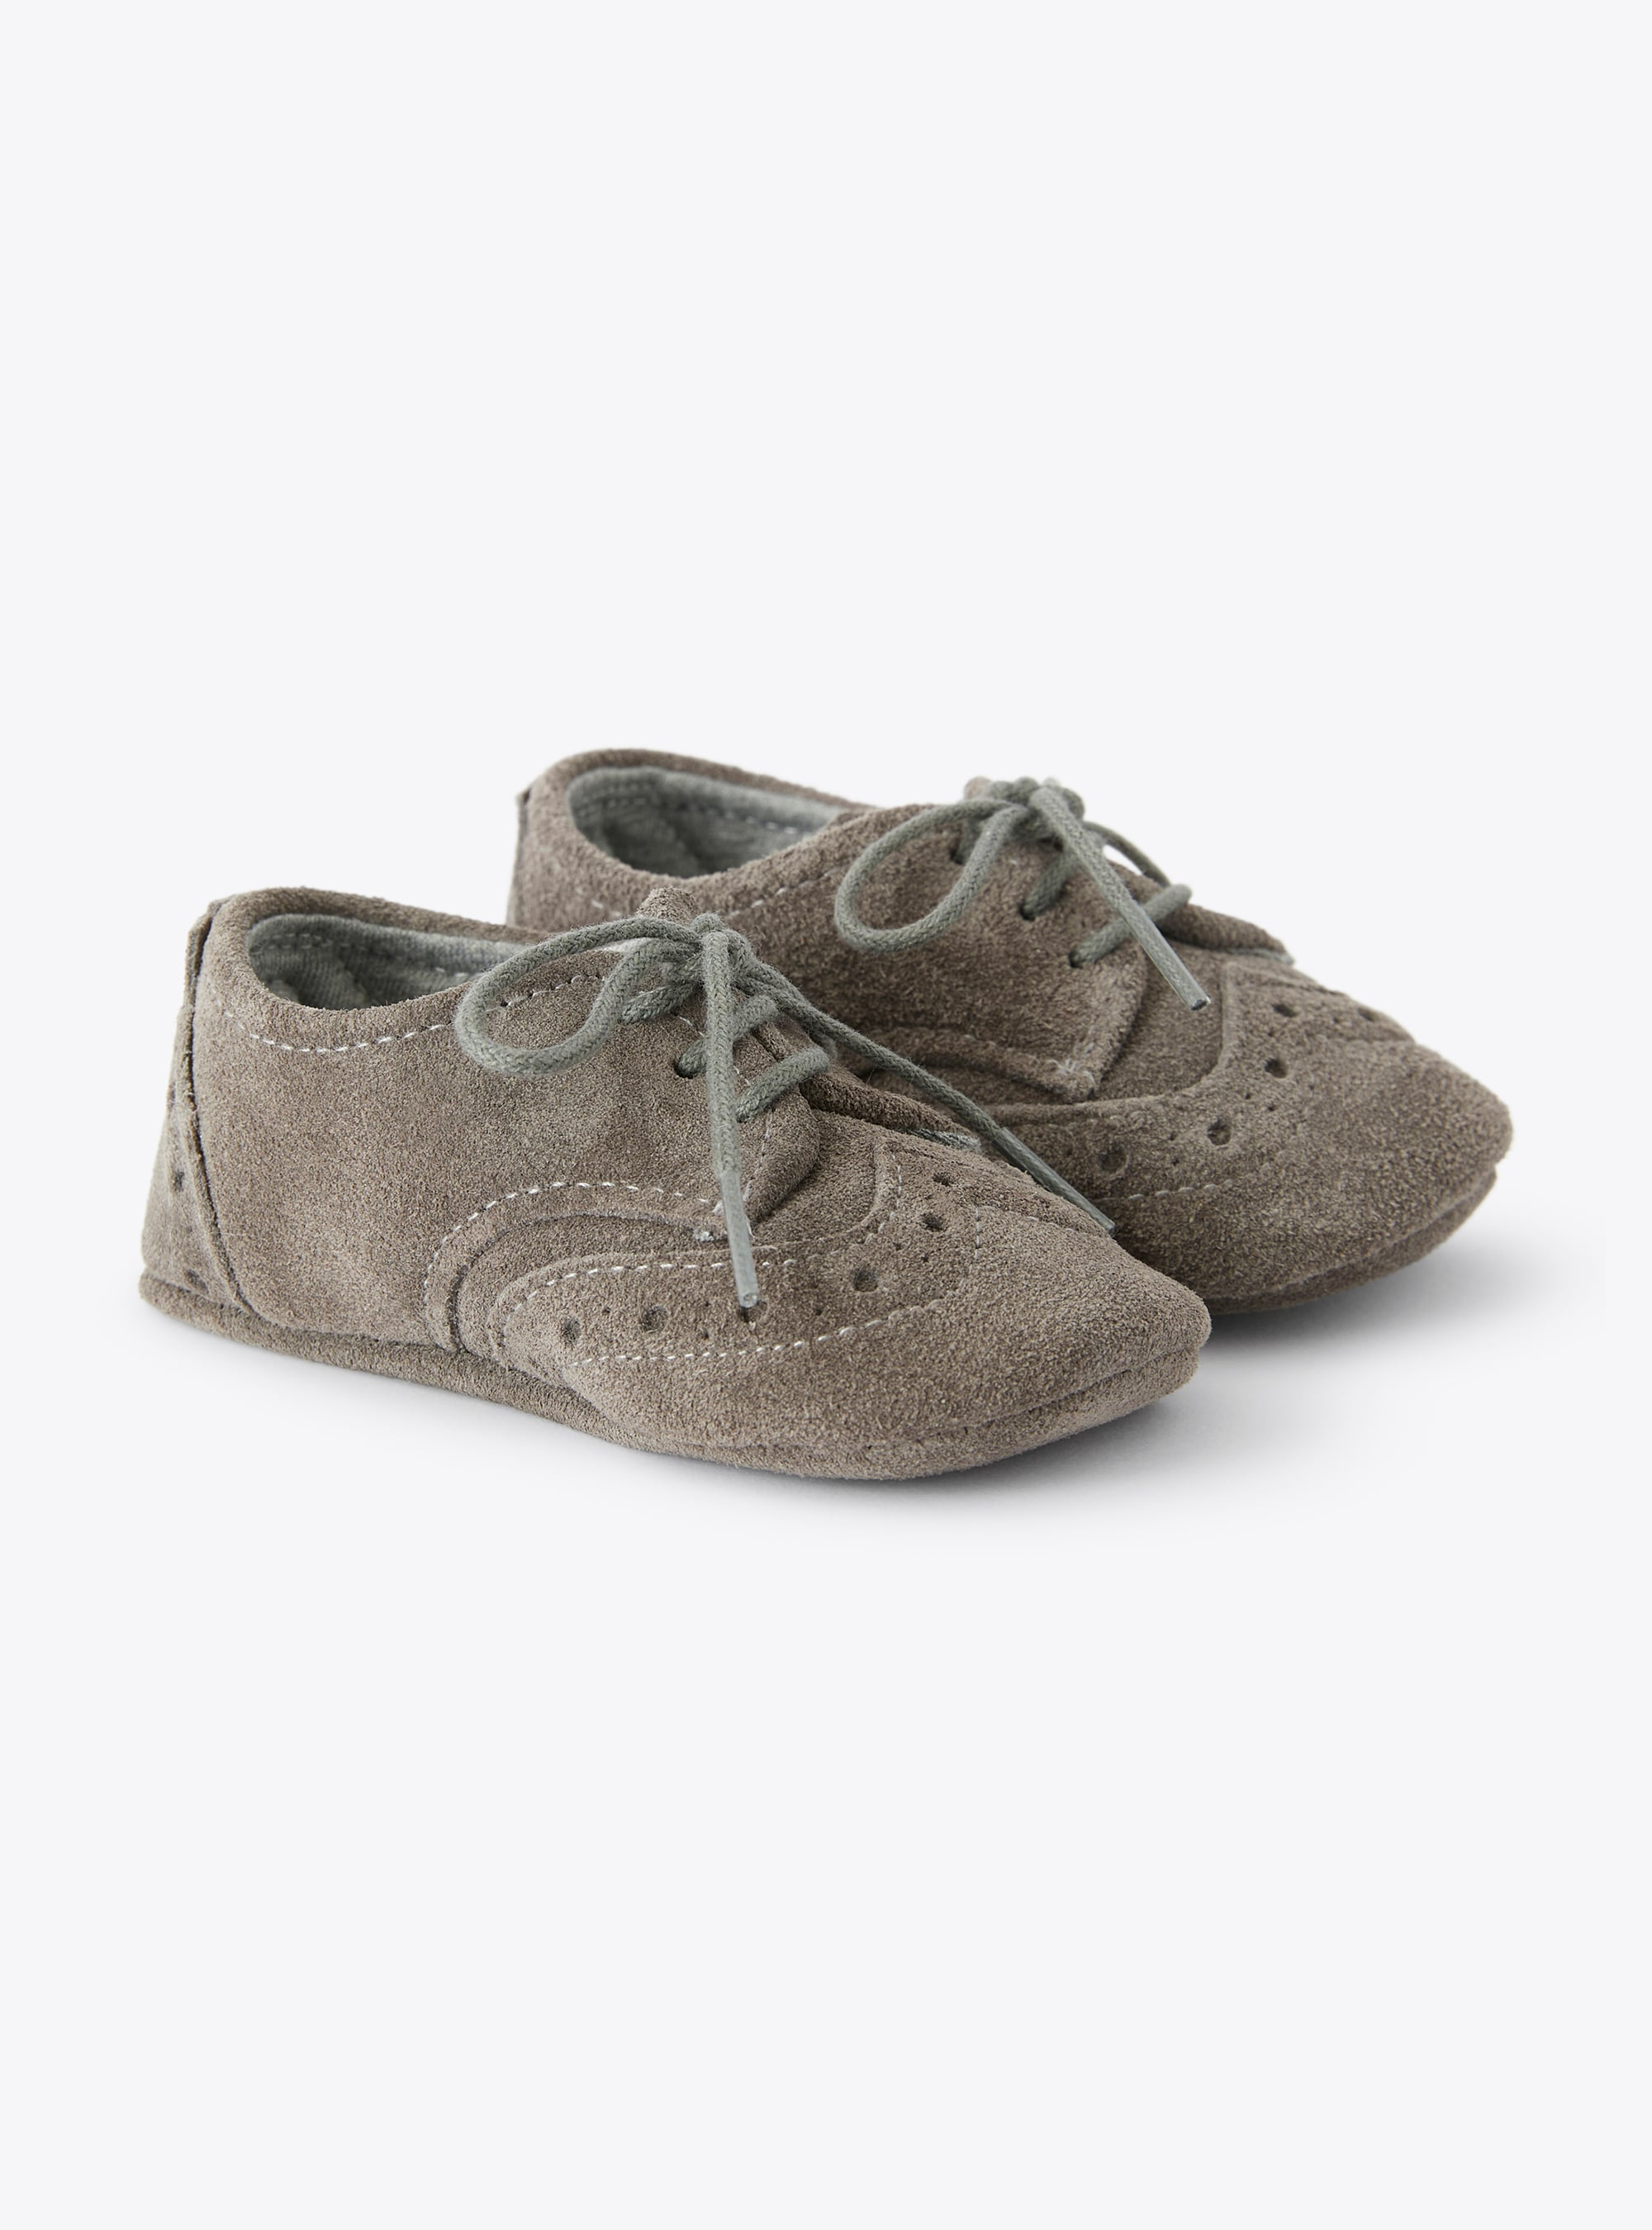 Baby suede lace-up shoes - Shoes - Il Gufo